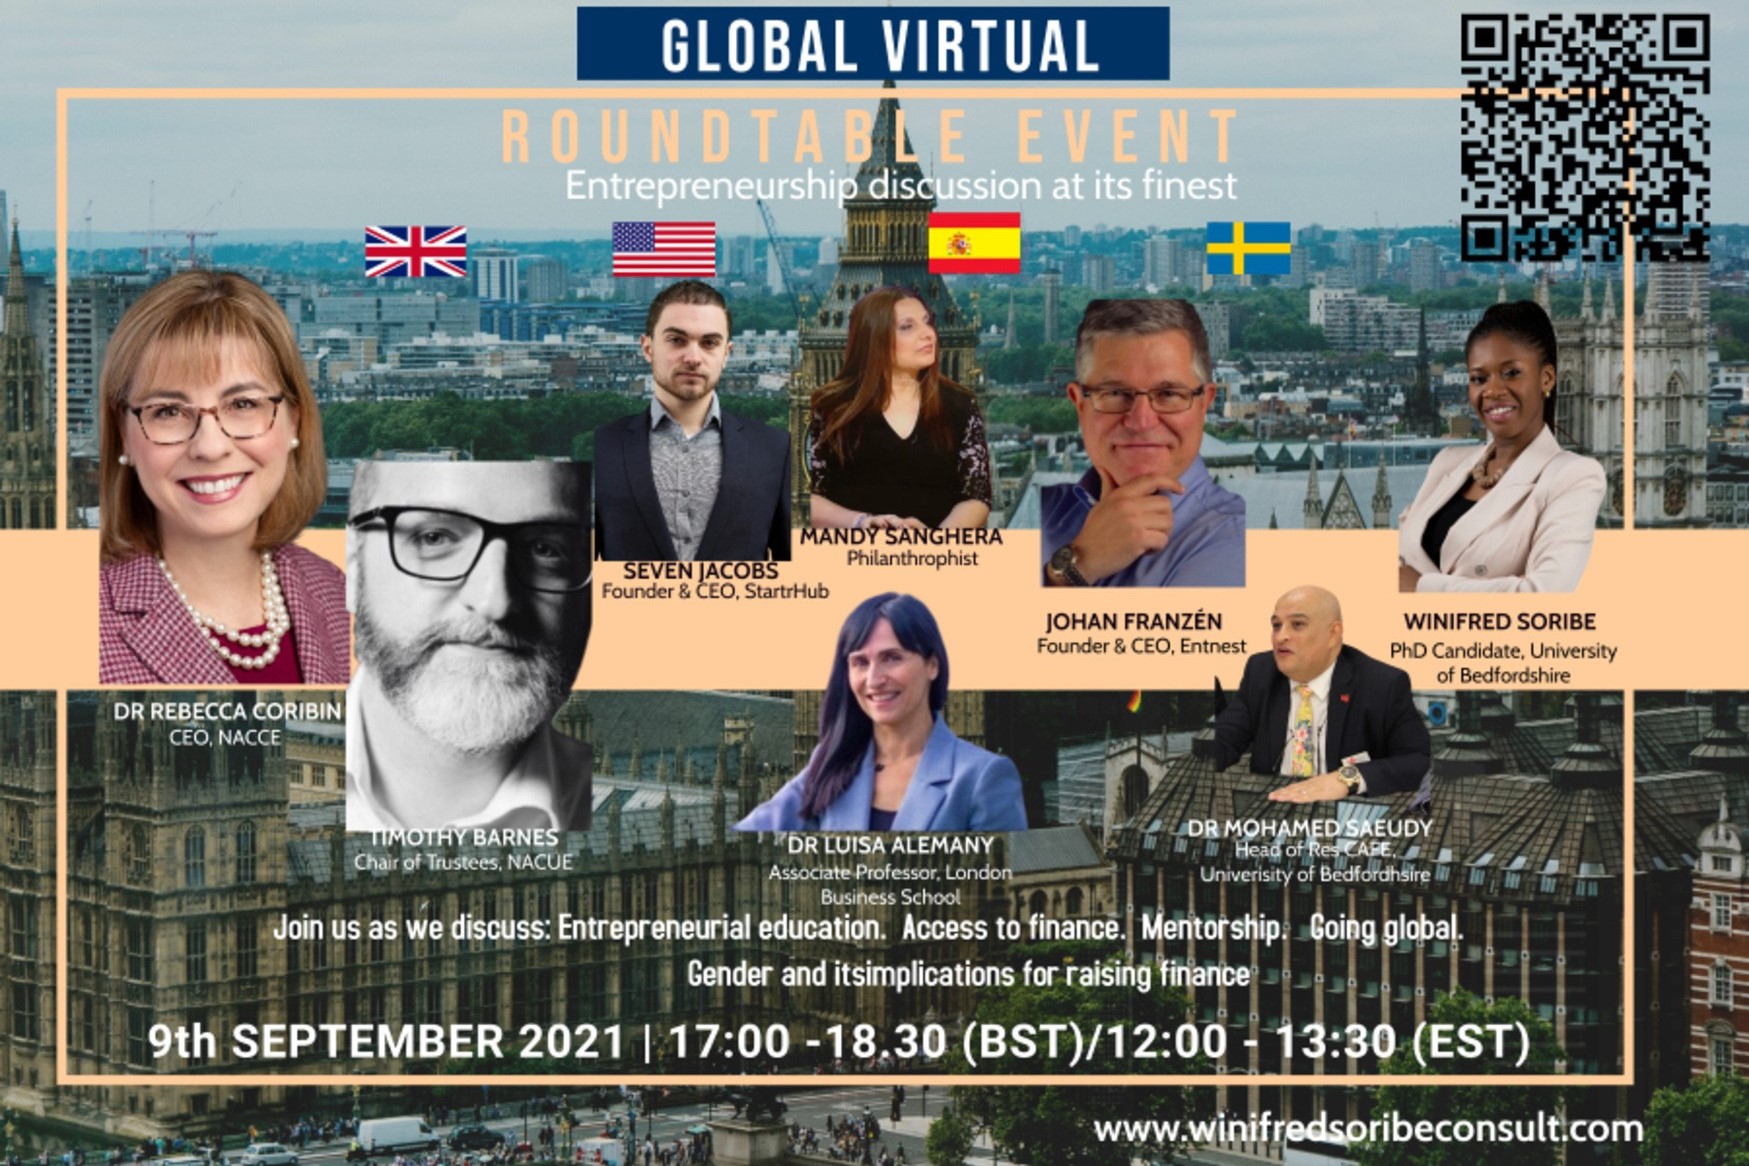 Global Virtual Roundtable Event : The changing Landscape of Entrepreneurship Across Borders; Europe and US Entrepreneurship discussion at its finest organized by 